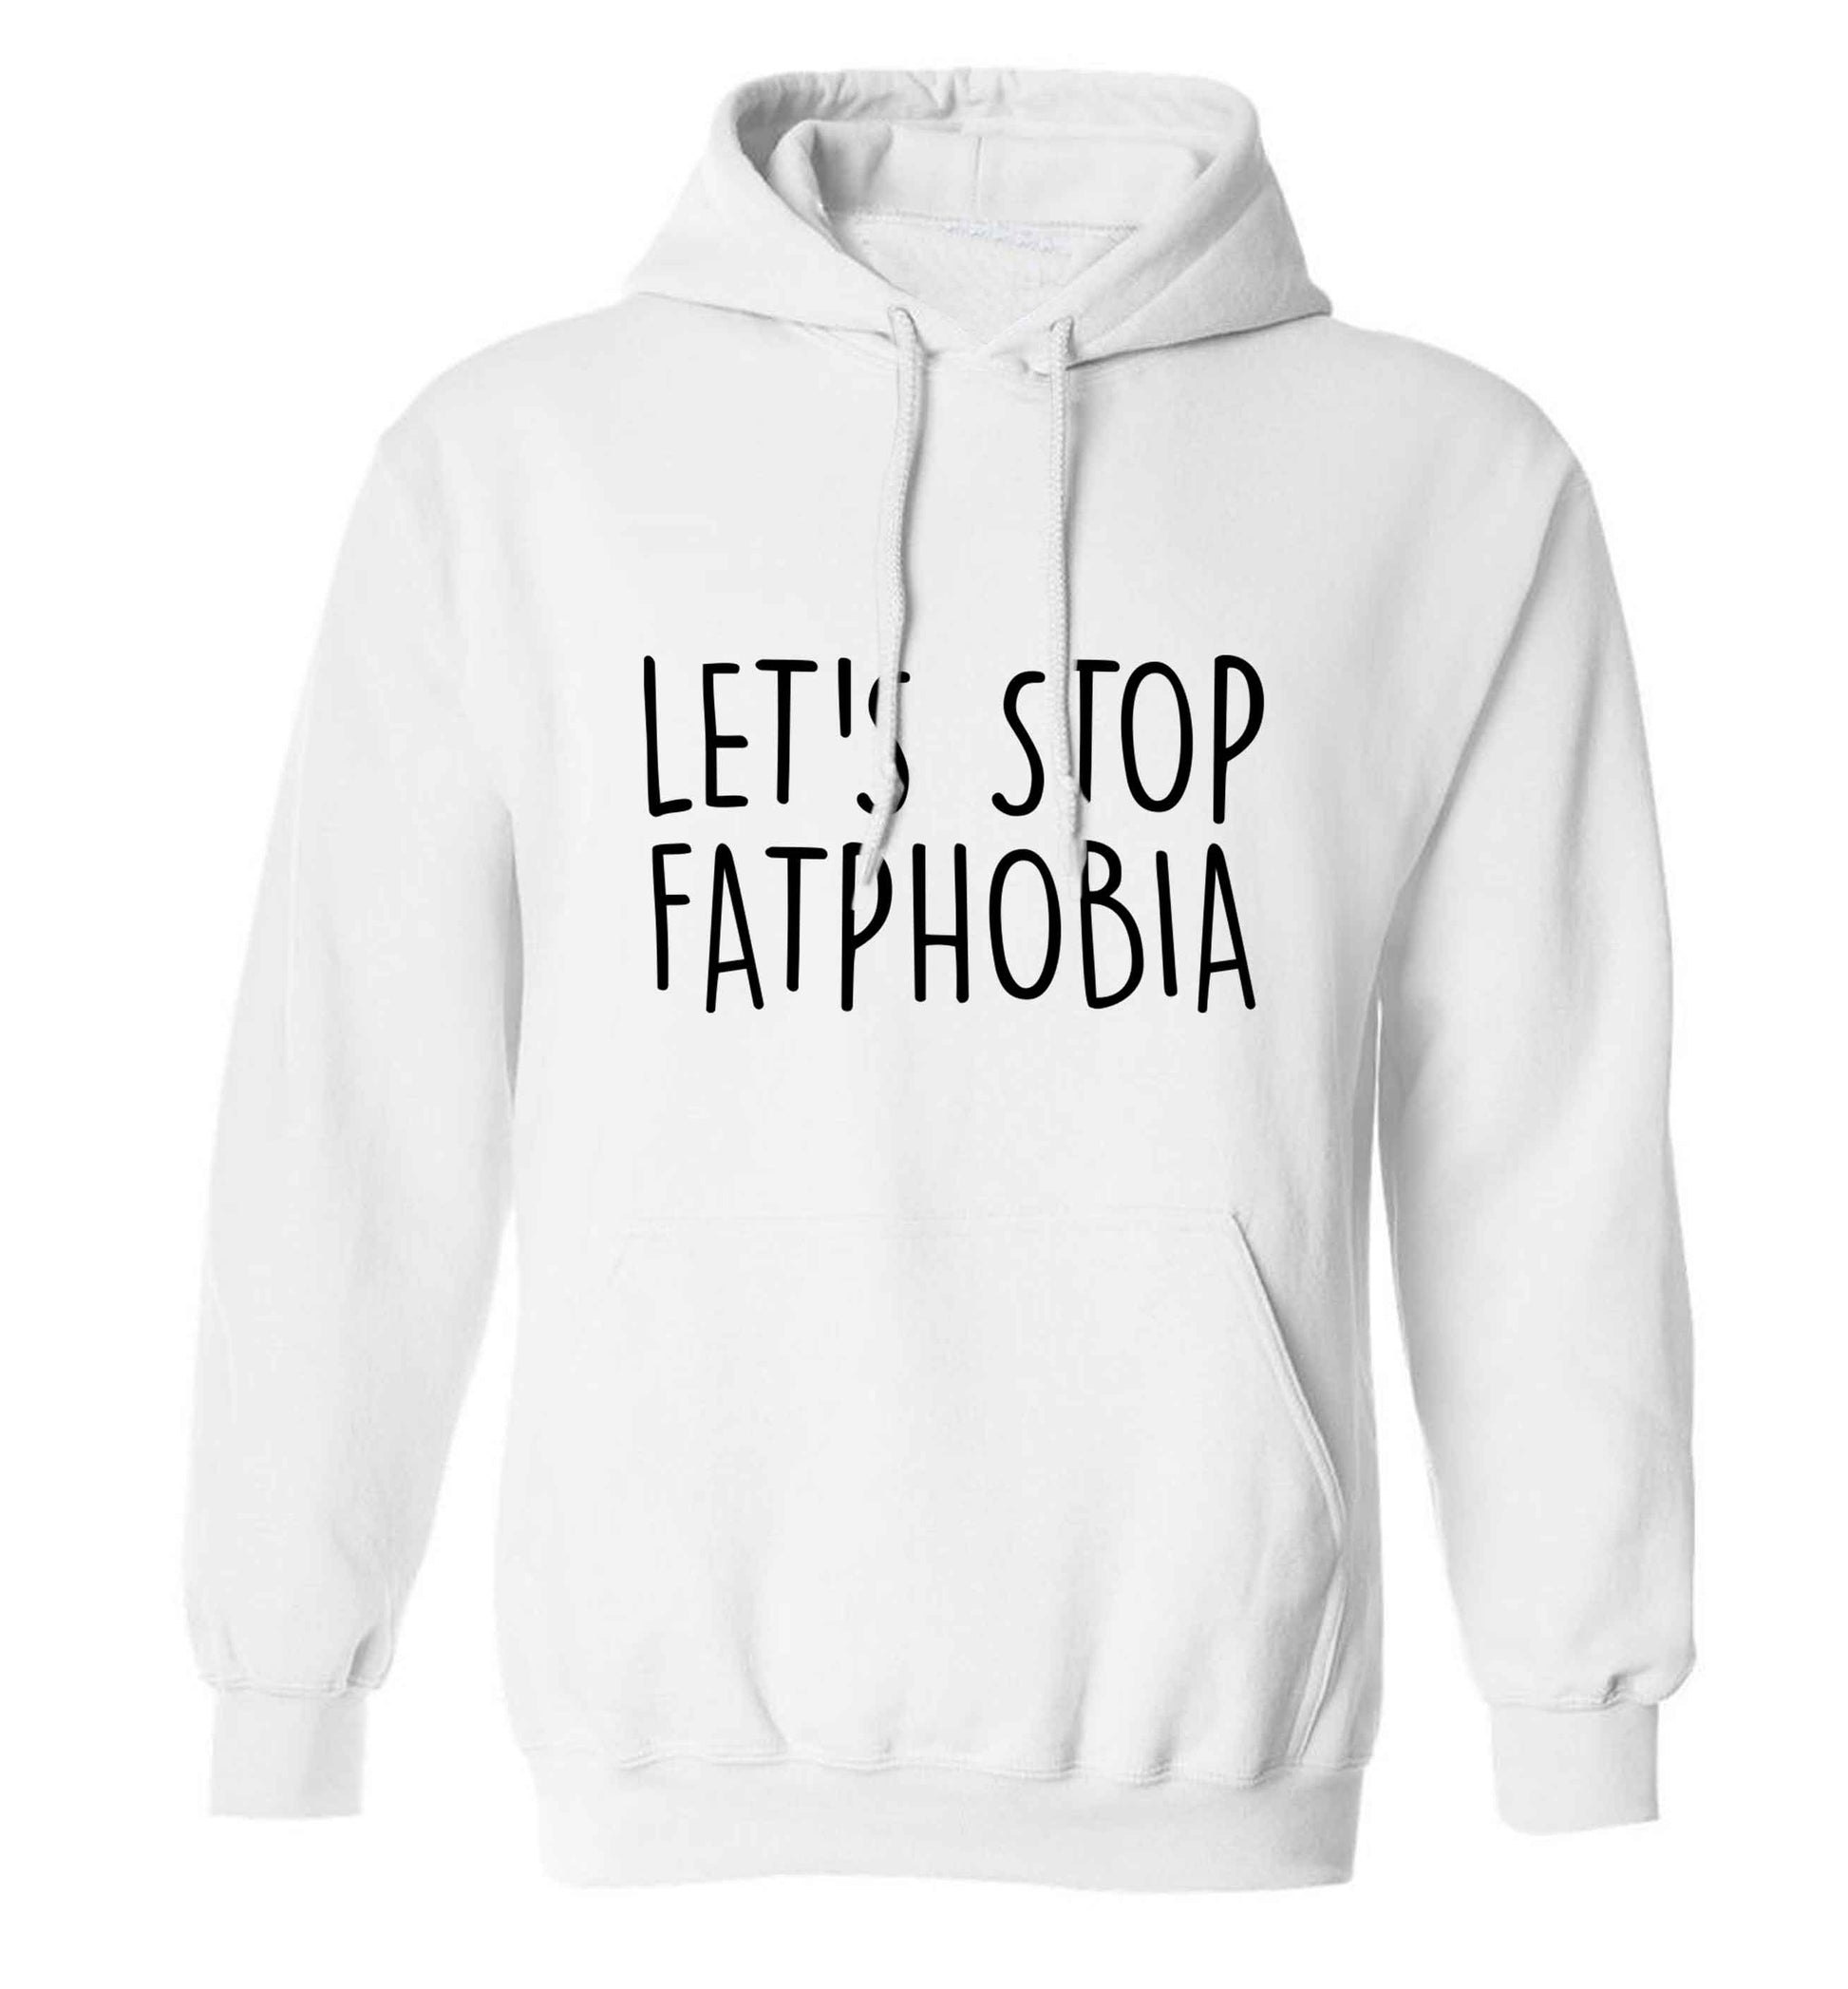 Let's stop fatphobia adults unisex white hoodie 2XL